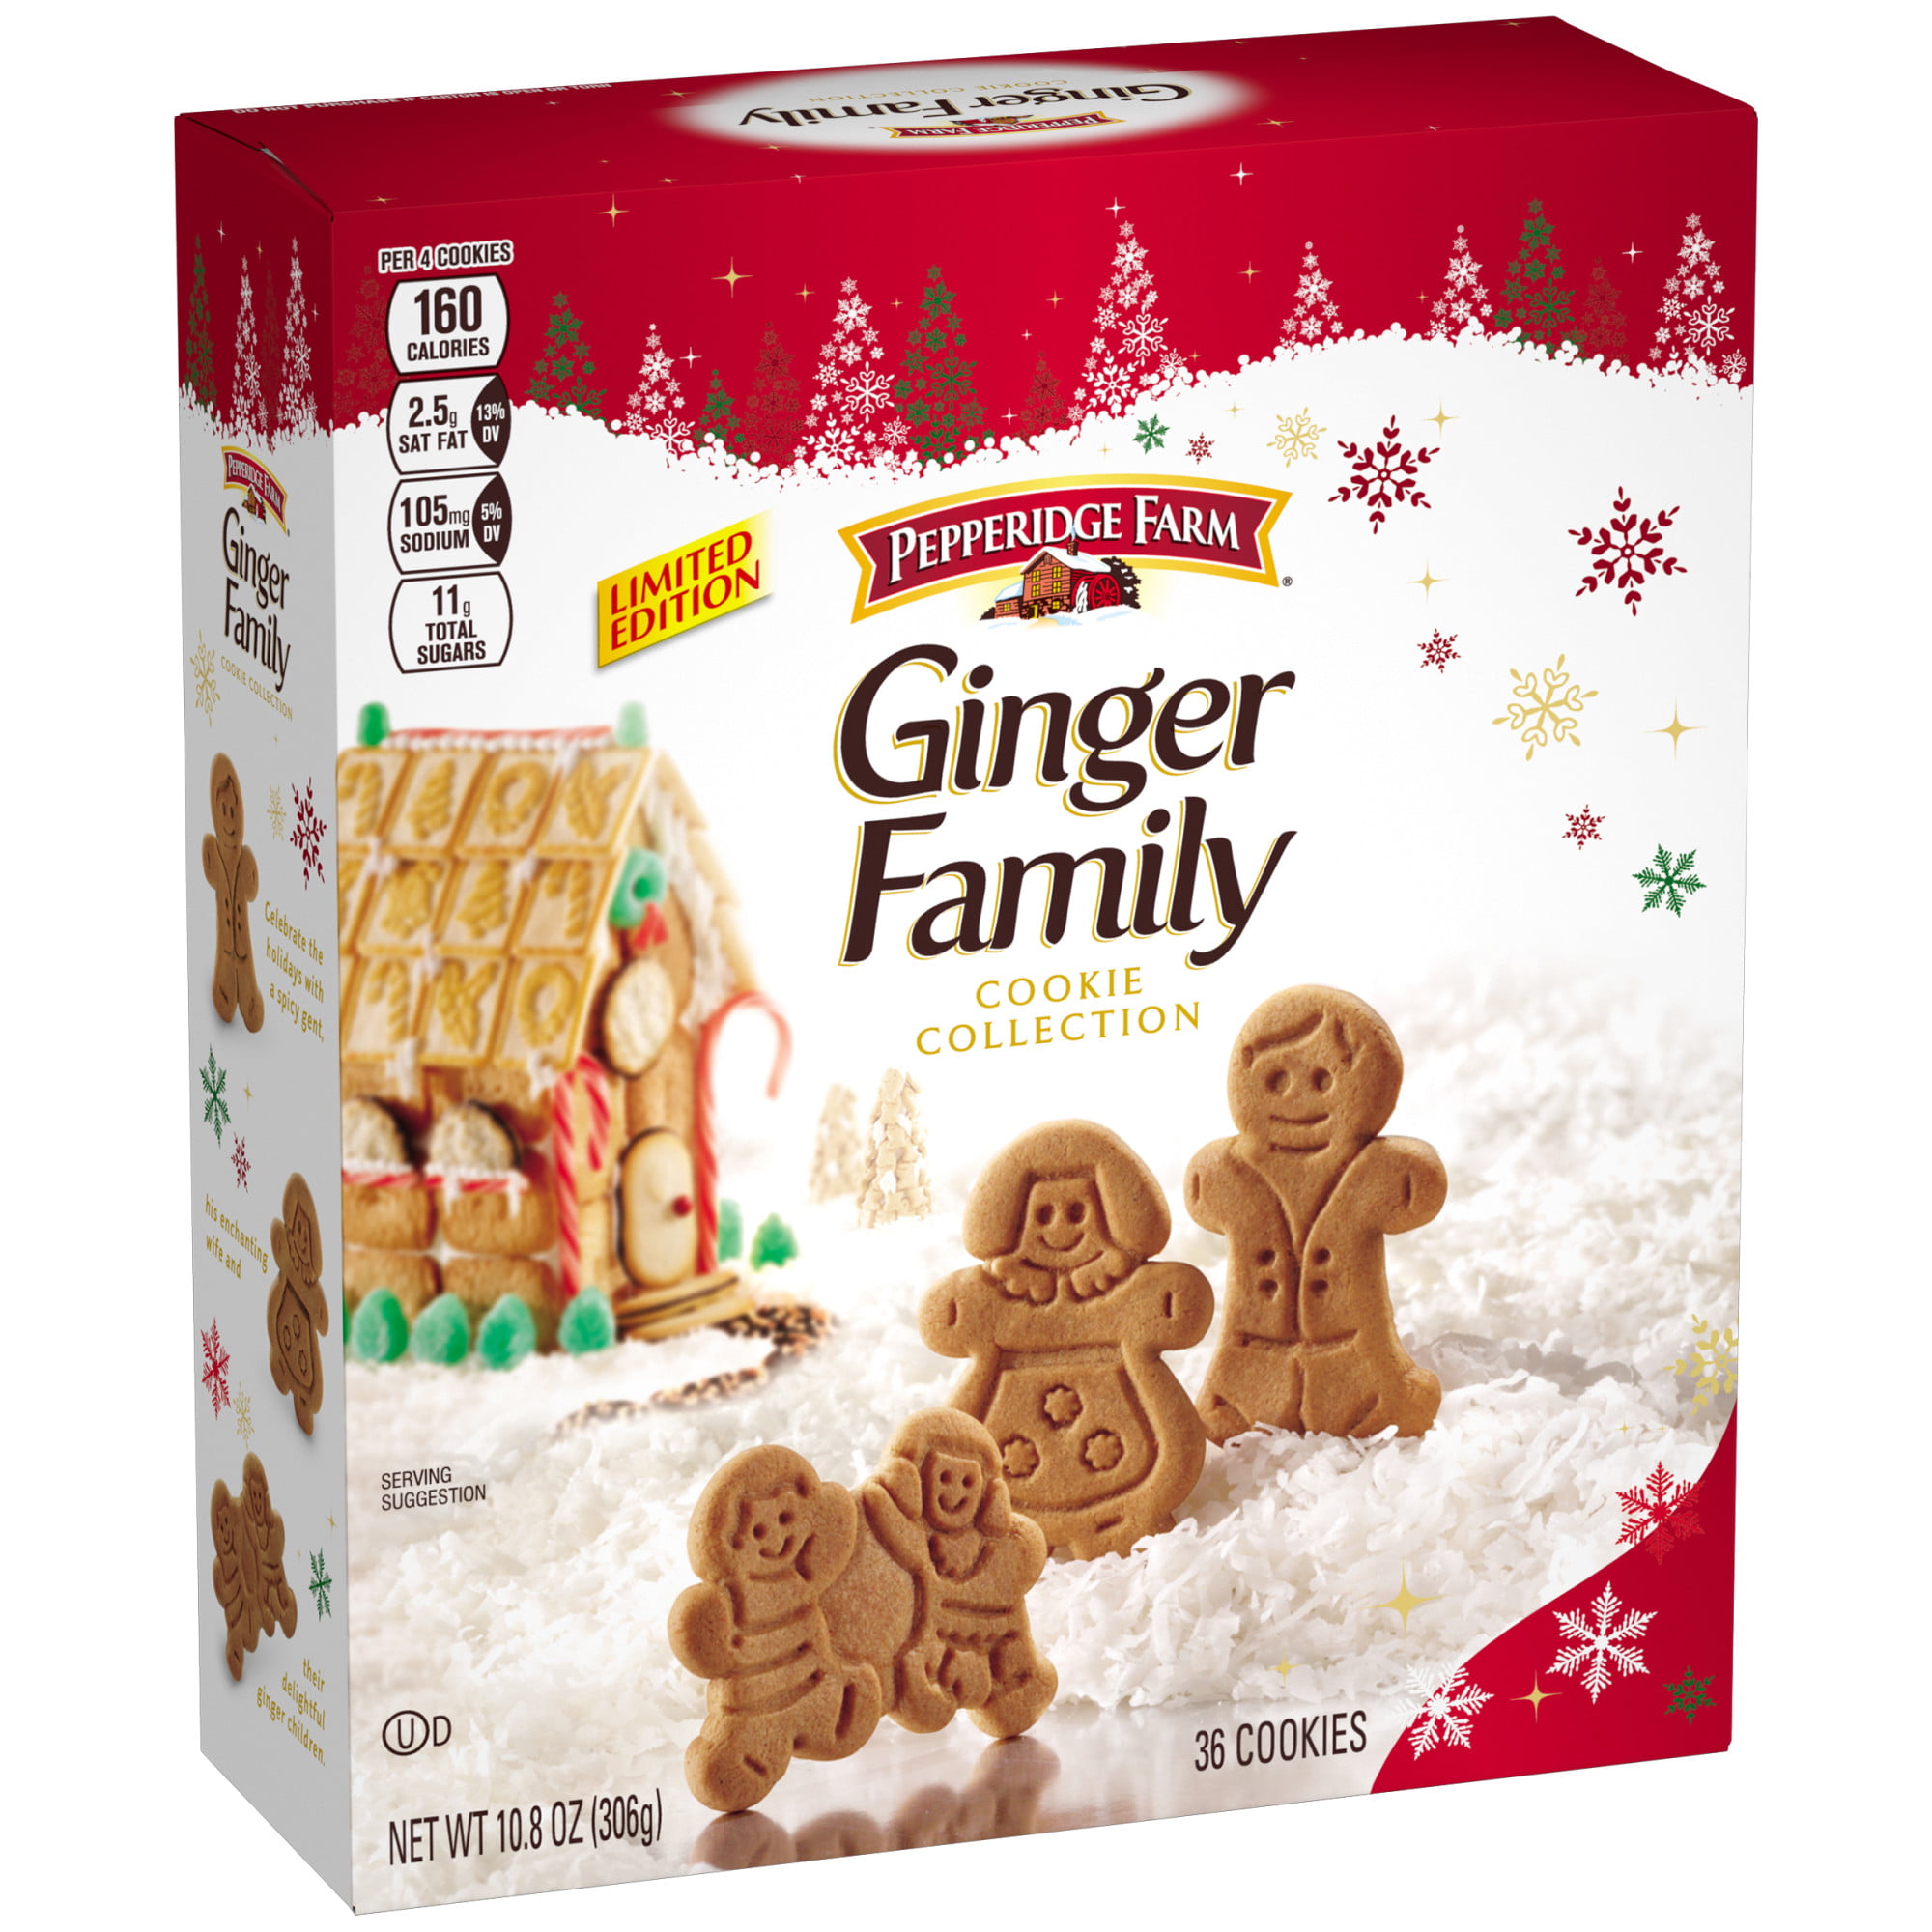 Pepperidge Farm Ginger Family Ginger Cookies Collection, 10.8 oz. Box